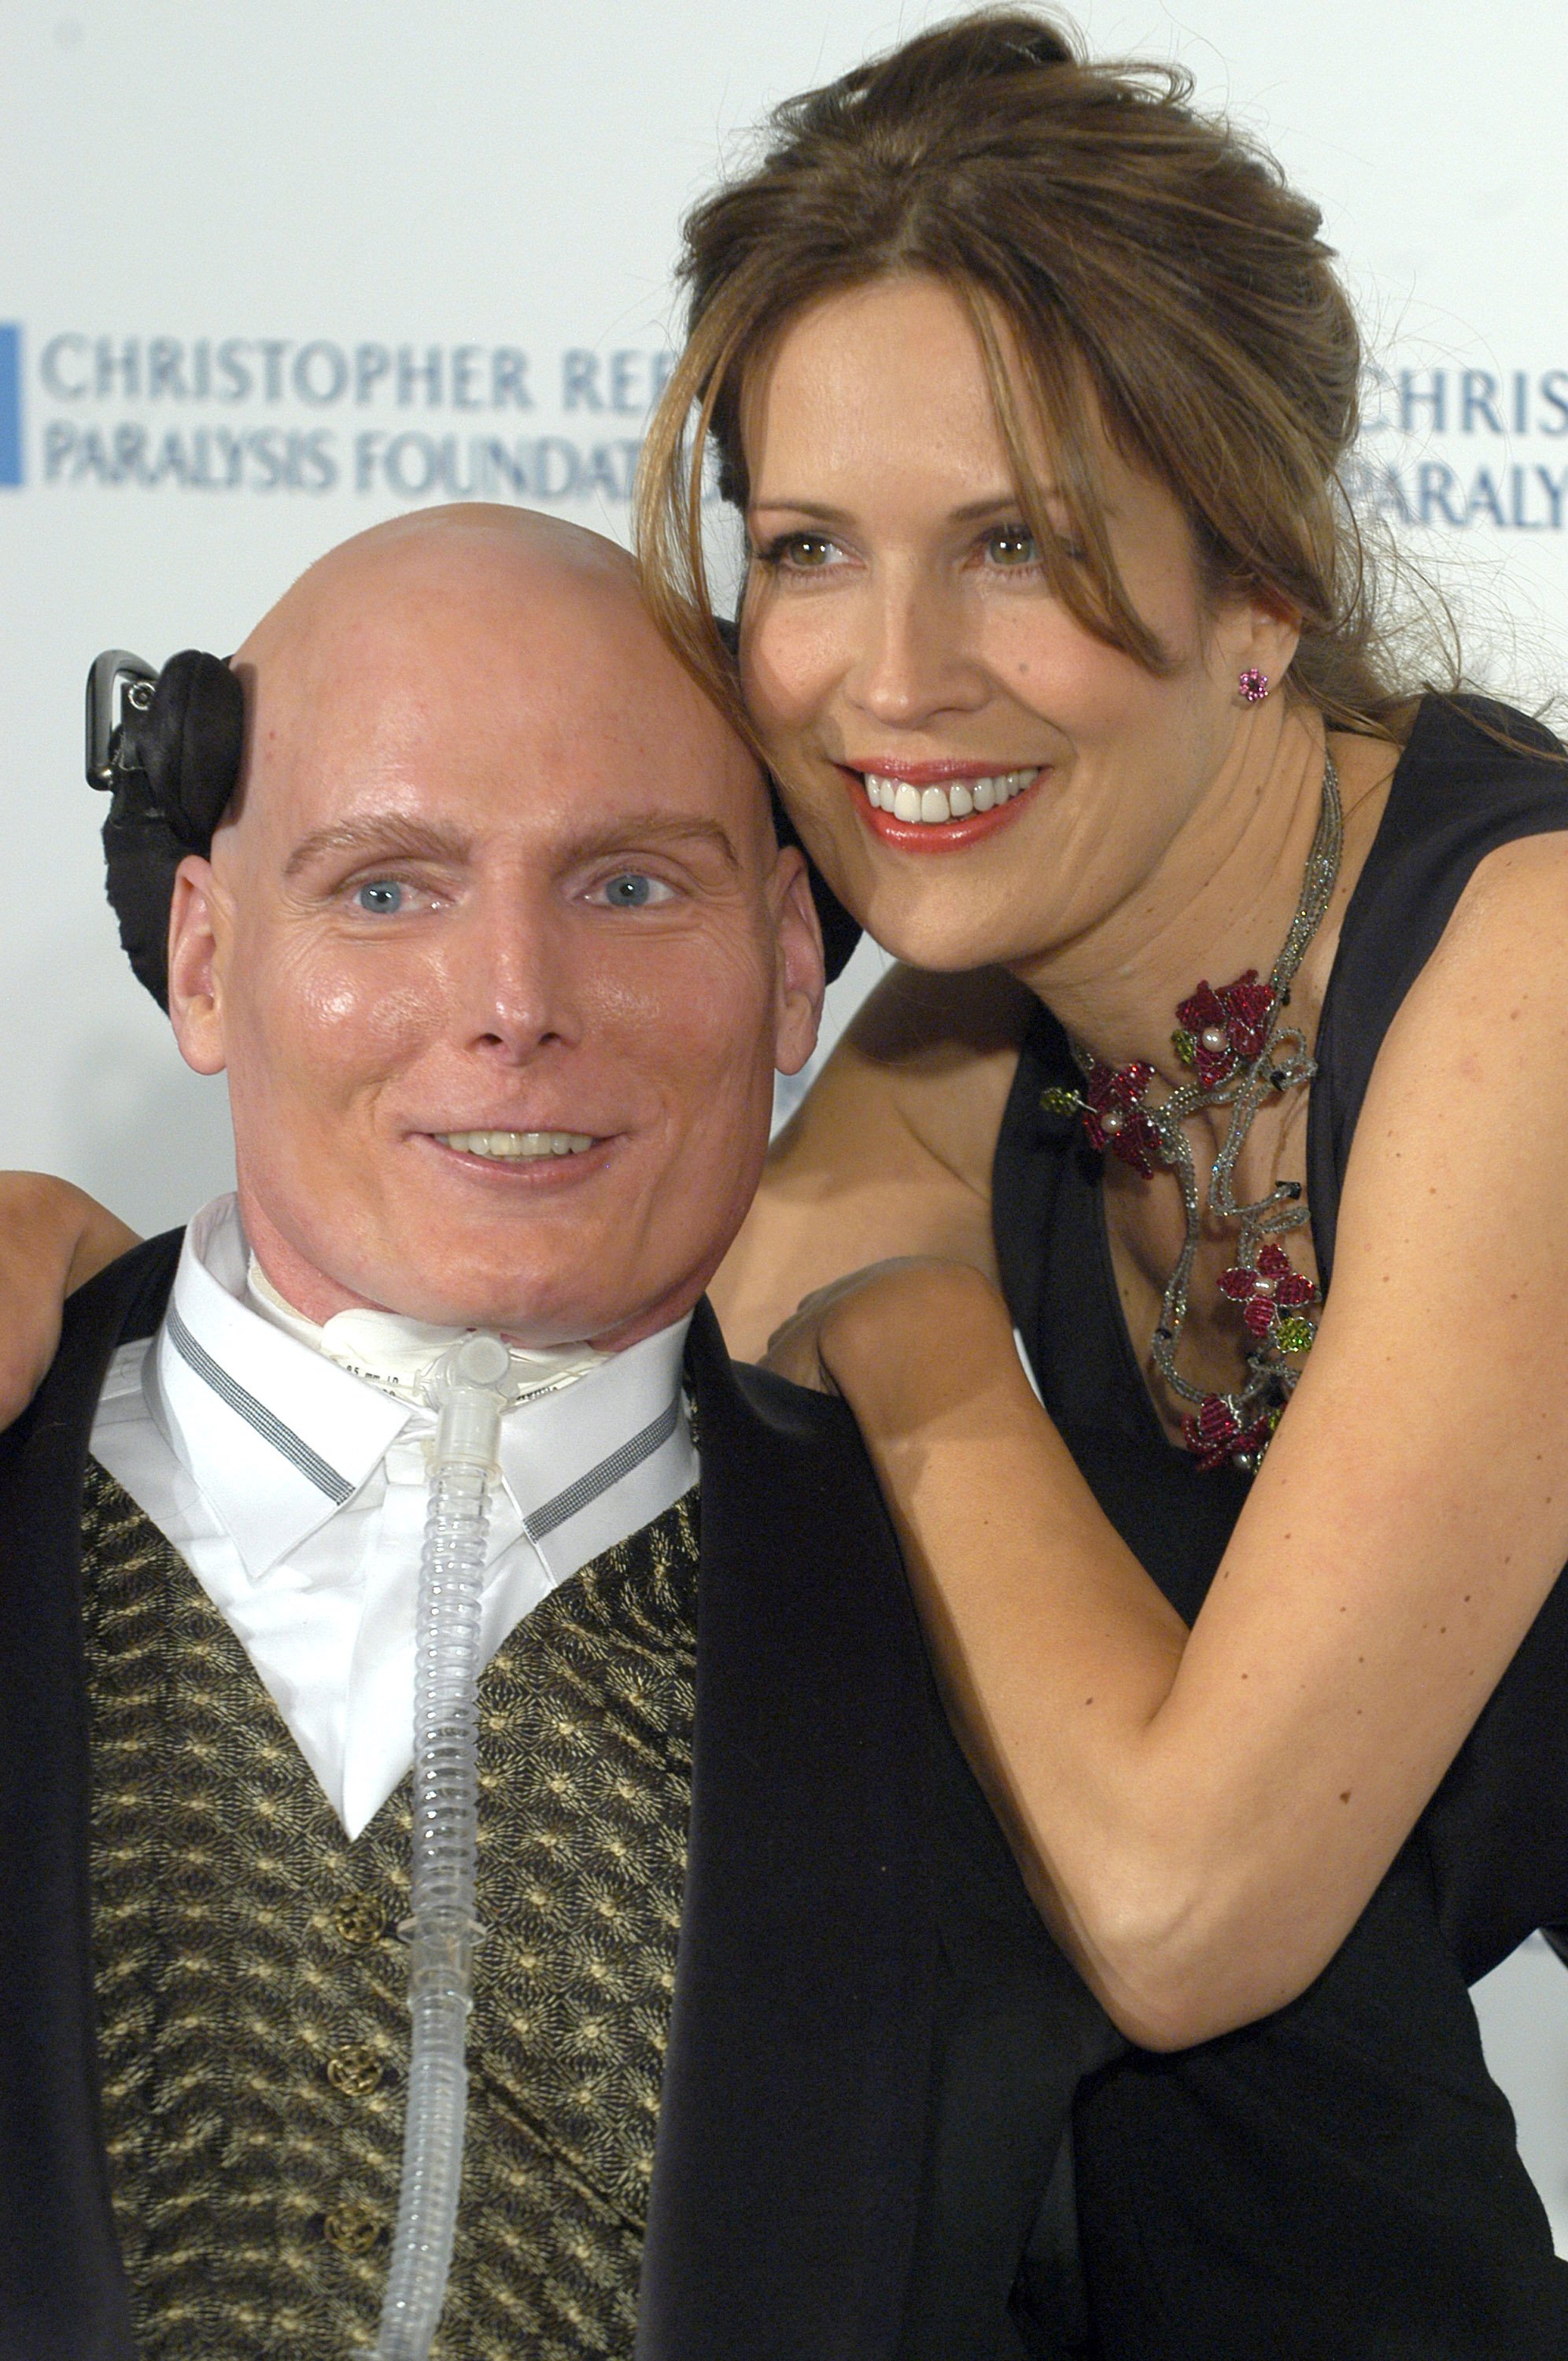 Christopher and Dana Reeve at the 13th Annual A Magical Evening Gala by The Christopher Reeve Paralysis Foundation on November 24, 2003 | Source: Getty Images